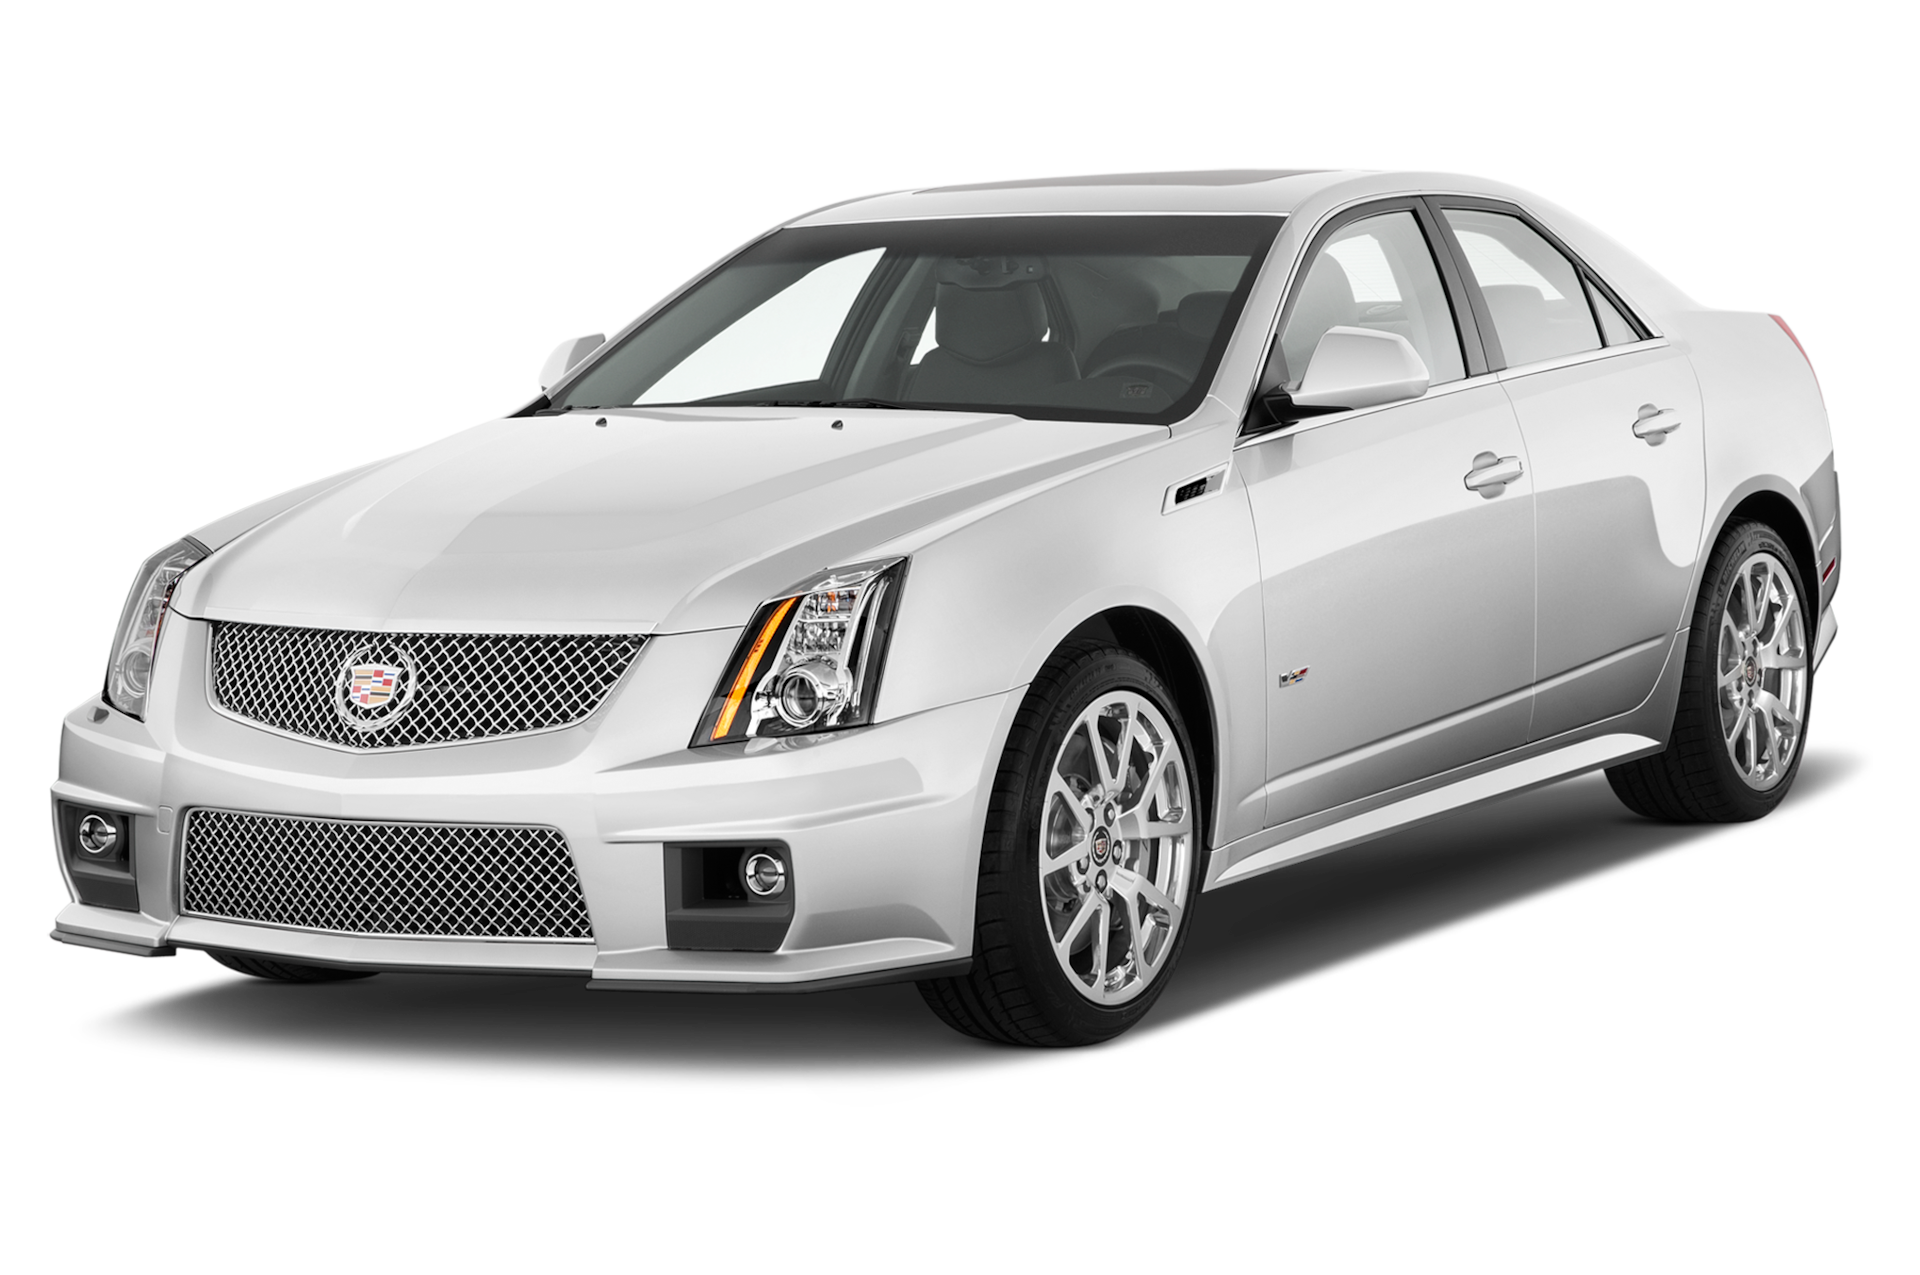 2012 Cadillac CTS-V Prices, Reviews, and Photos - MotorTrend